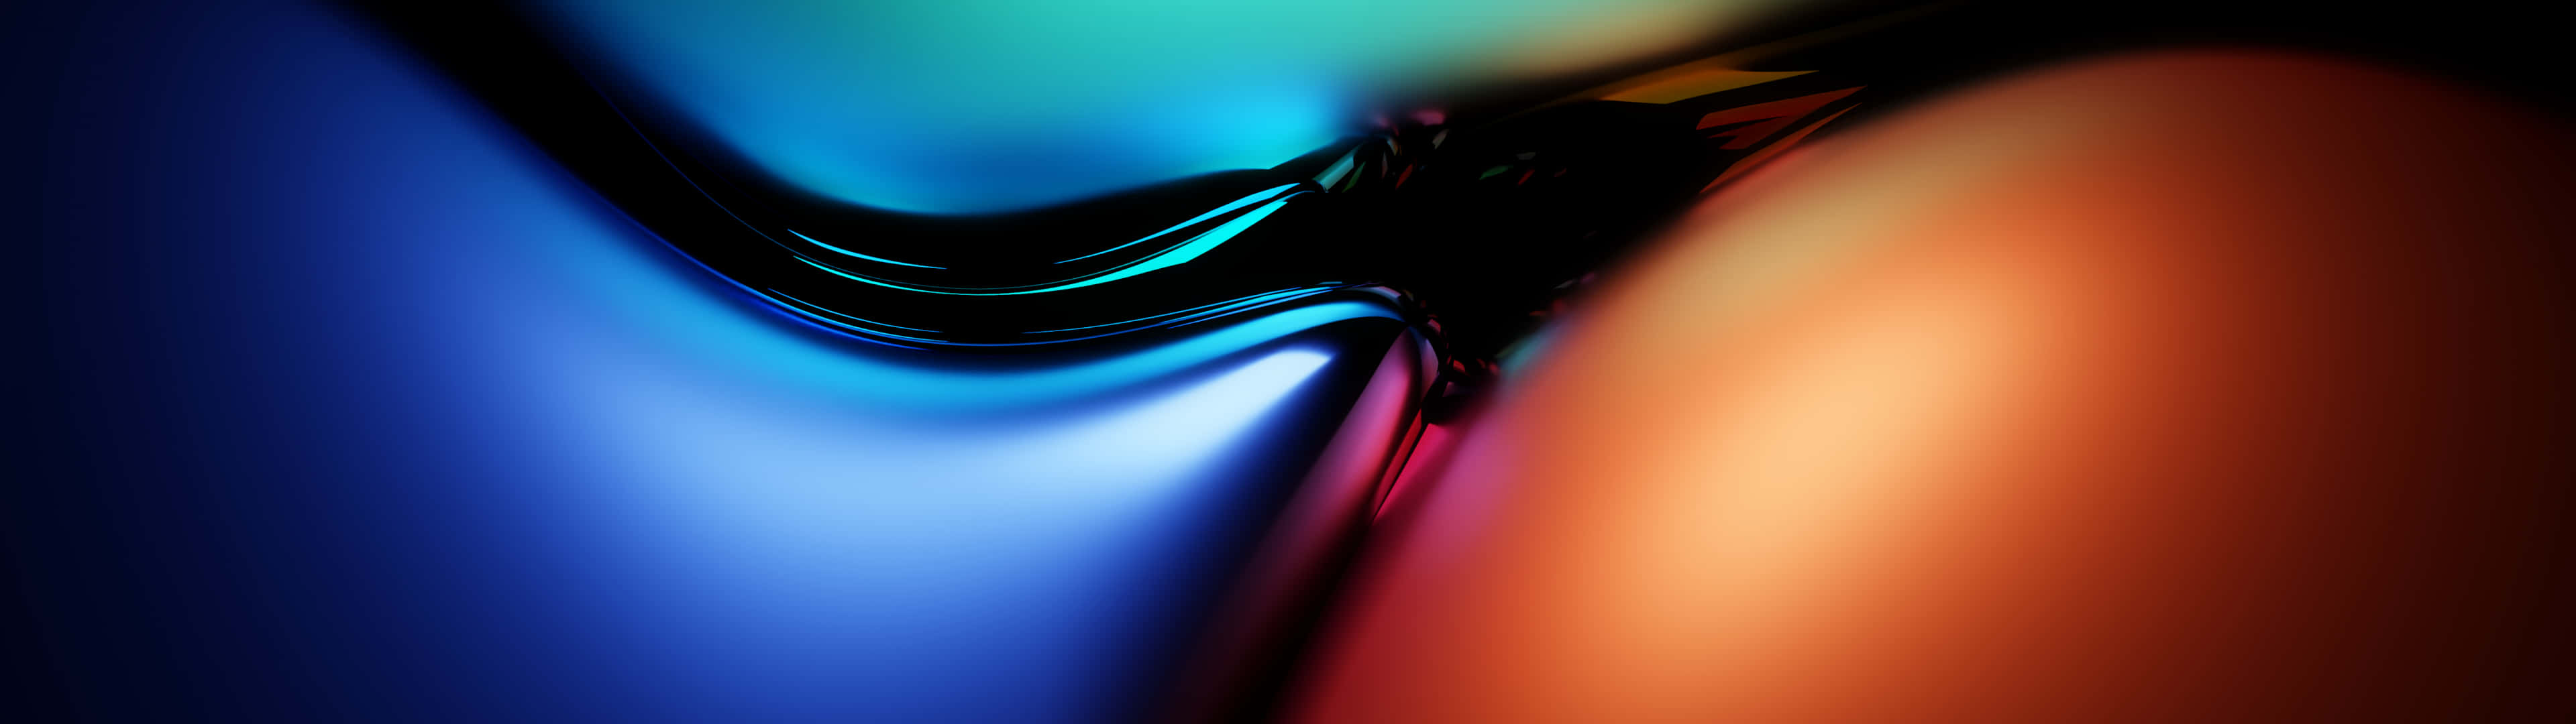 A Colorful Abstract Image Of A Phone Wallpaper